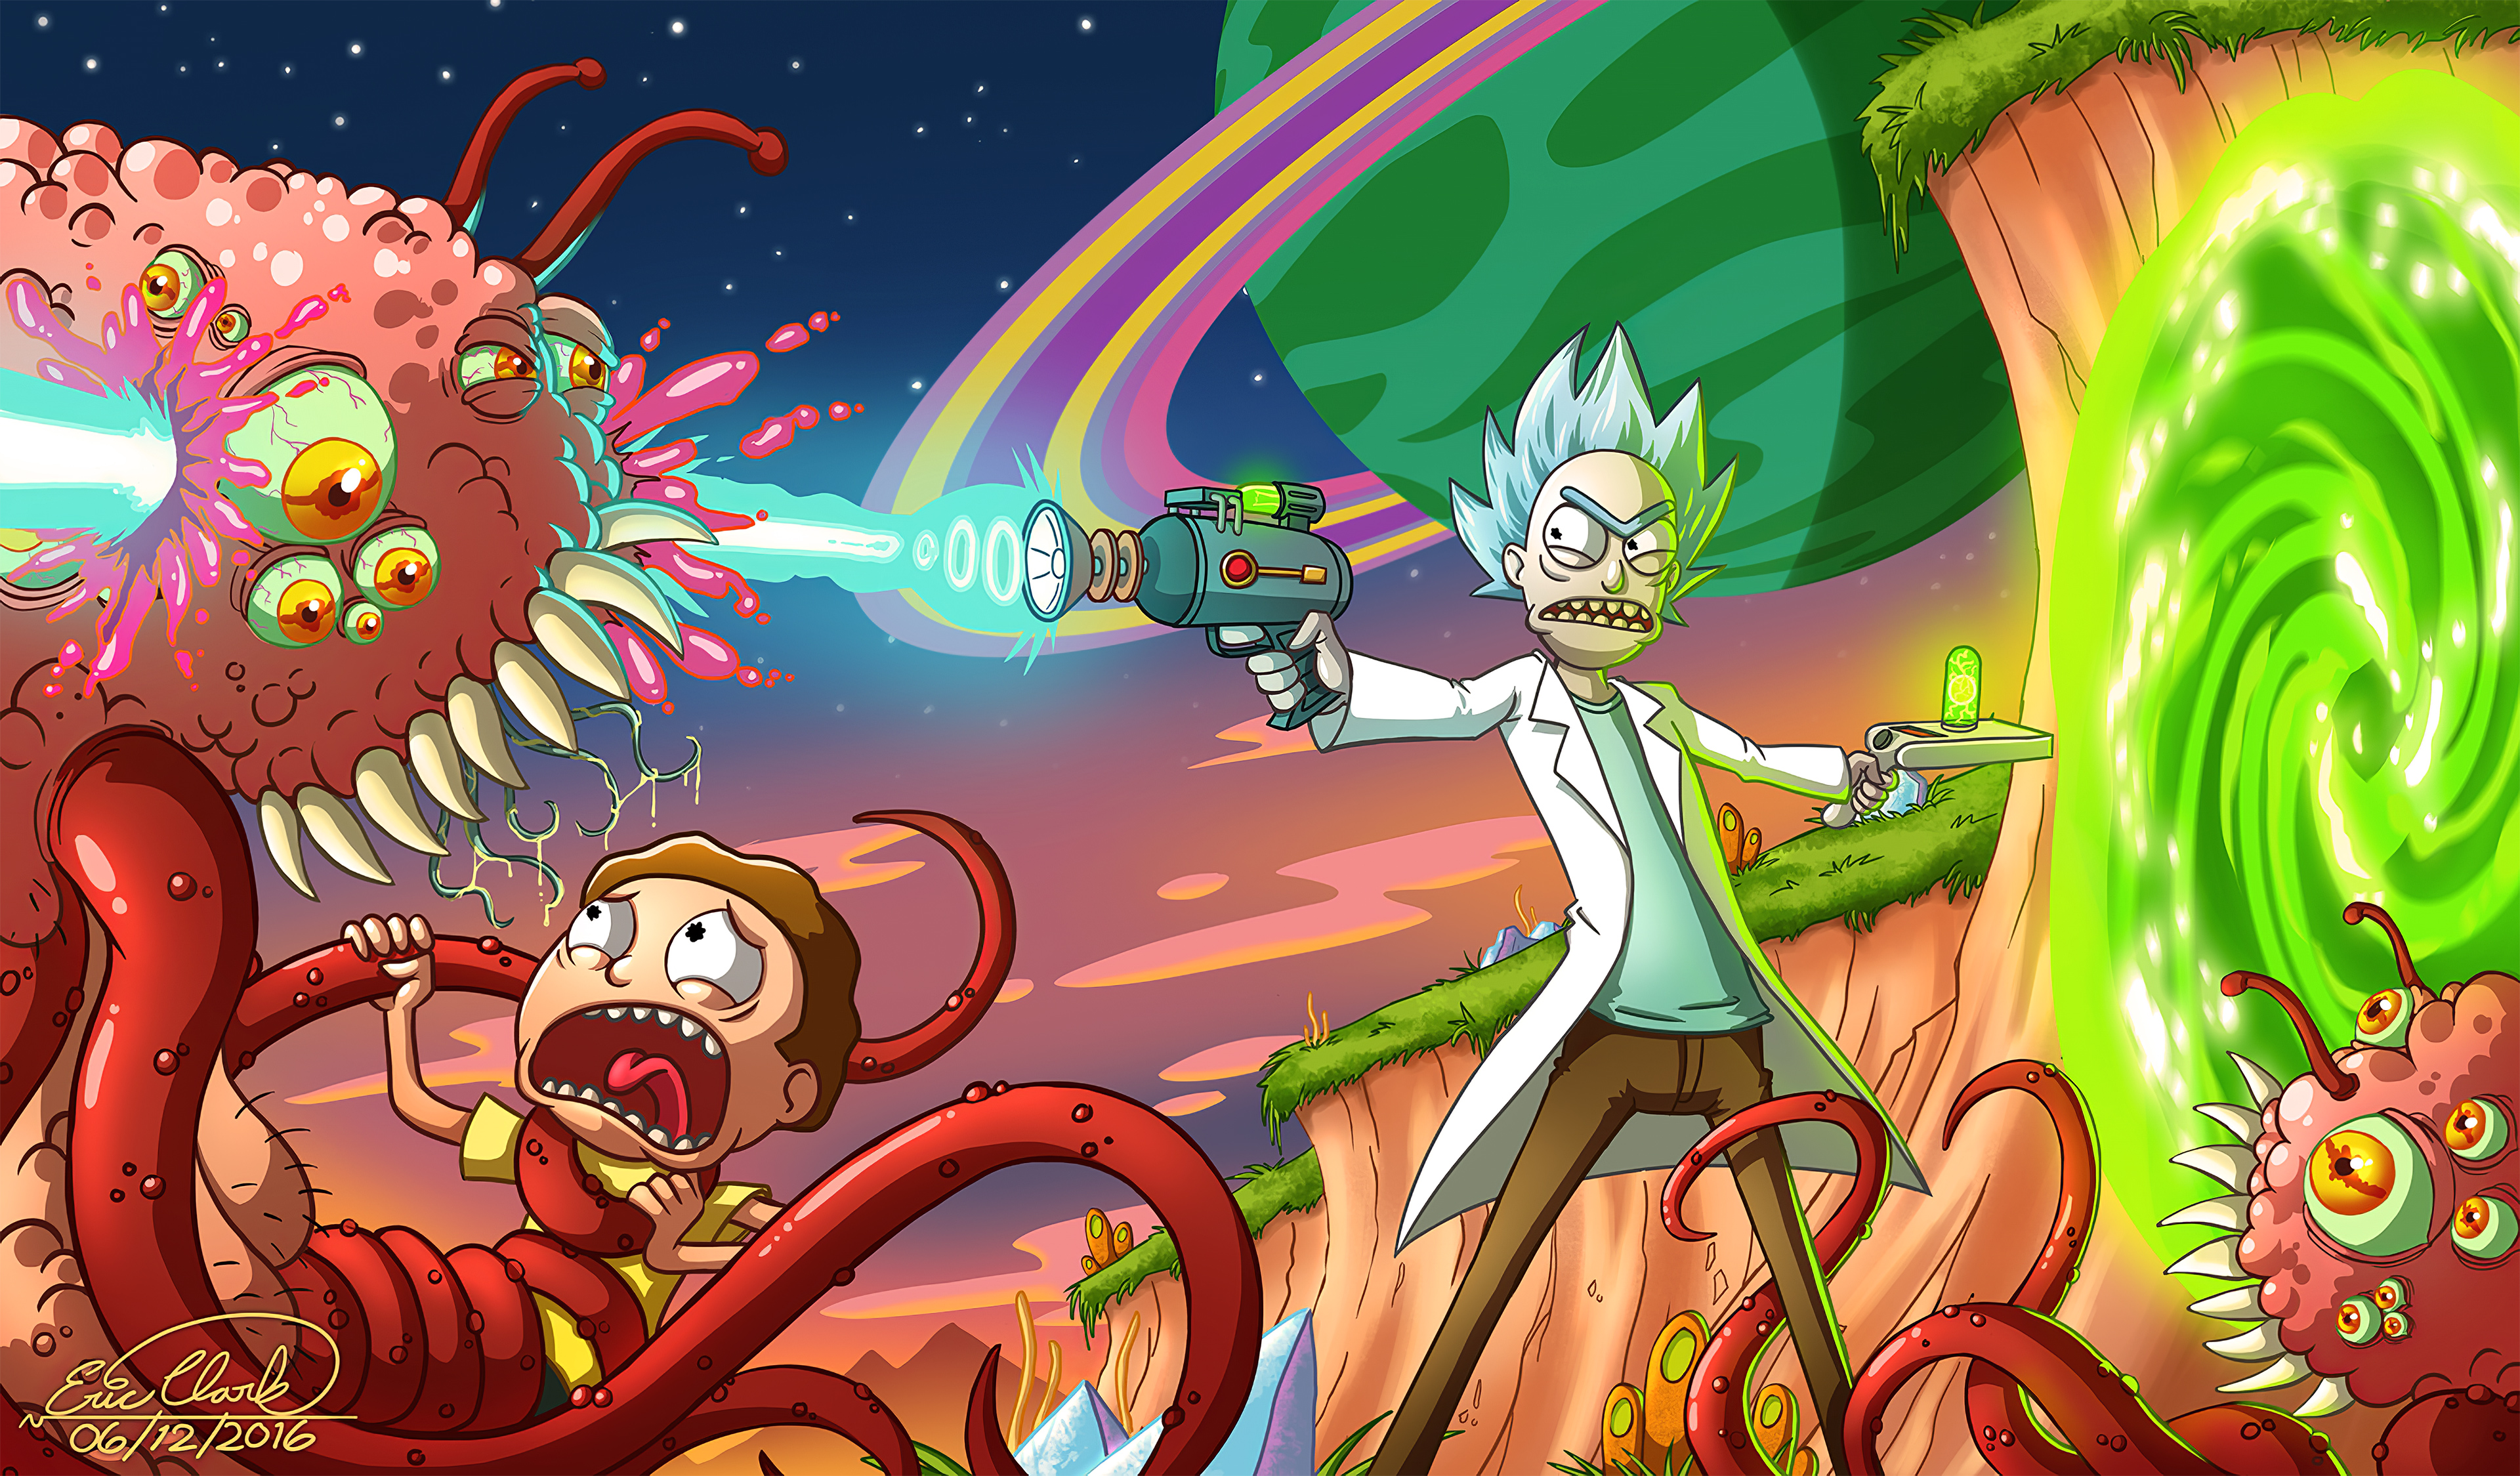 Rick and Morty Slime Cave Wallpaper - Rick and Morty Wallpapers